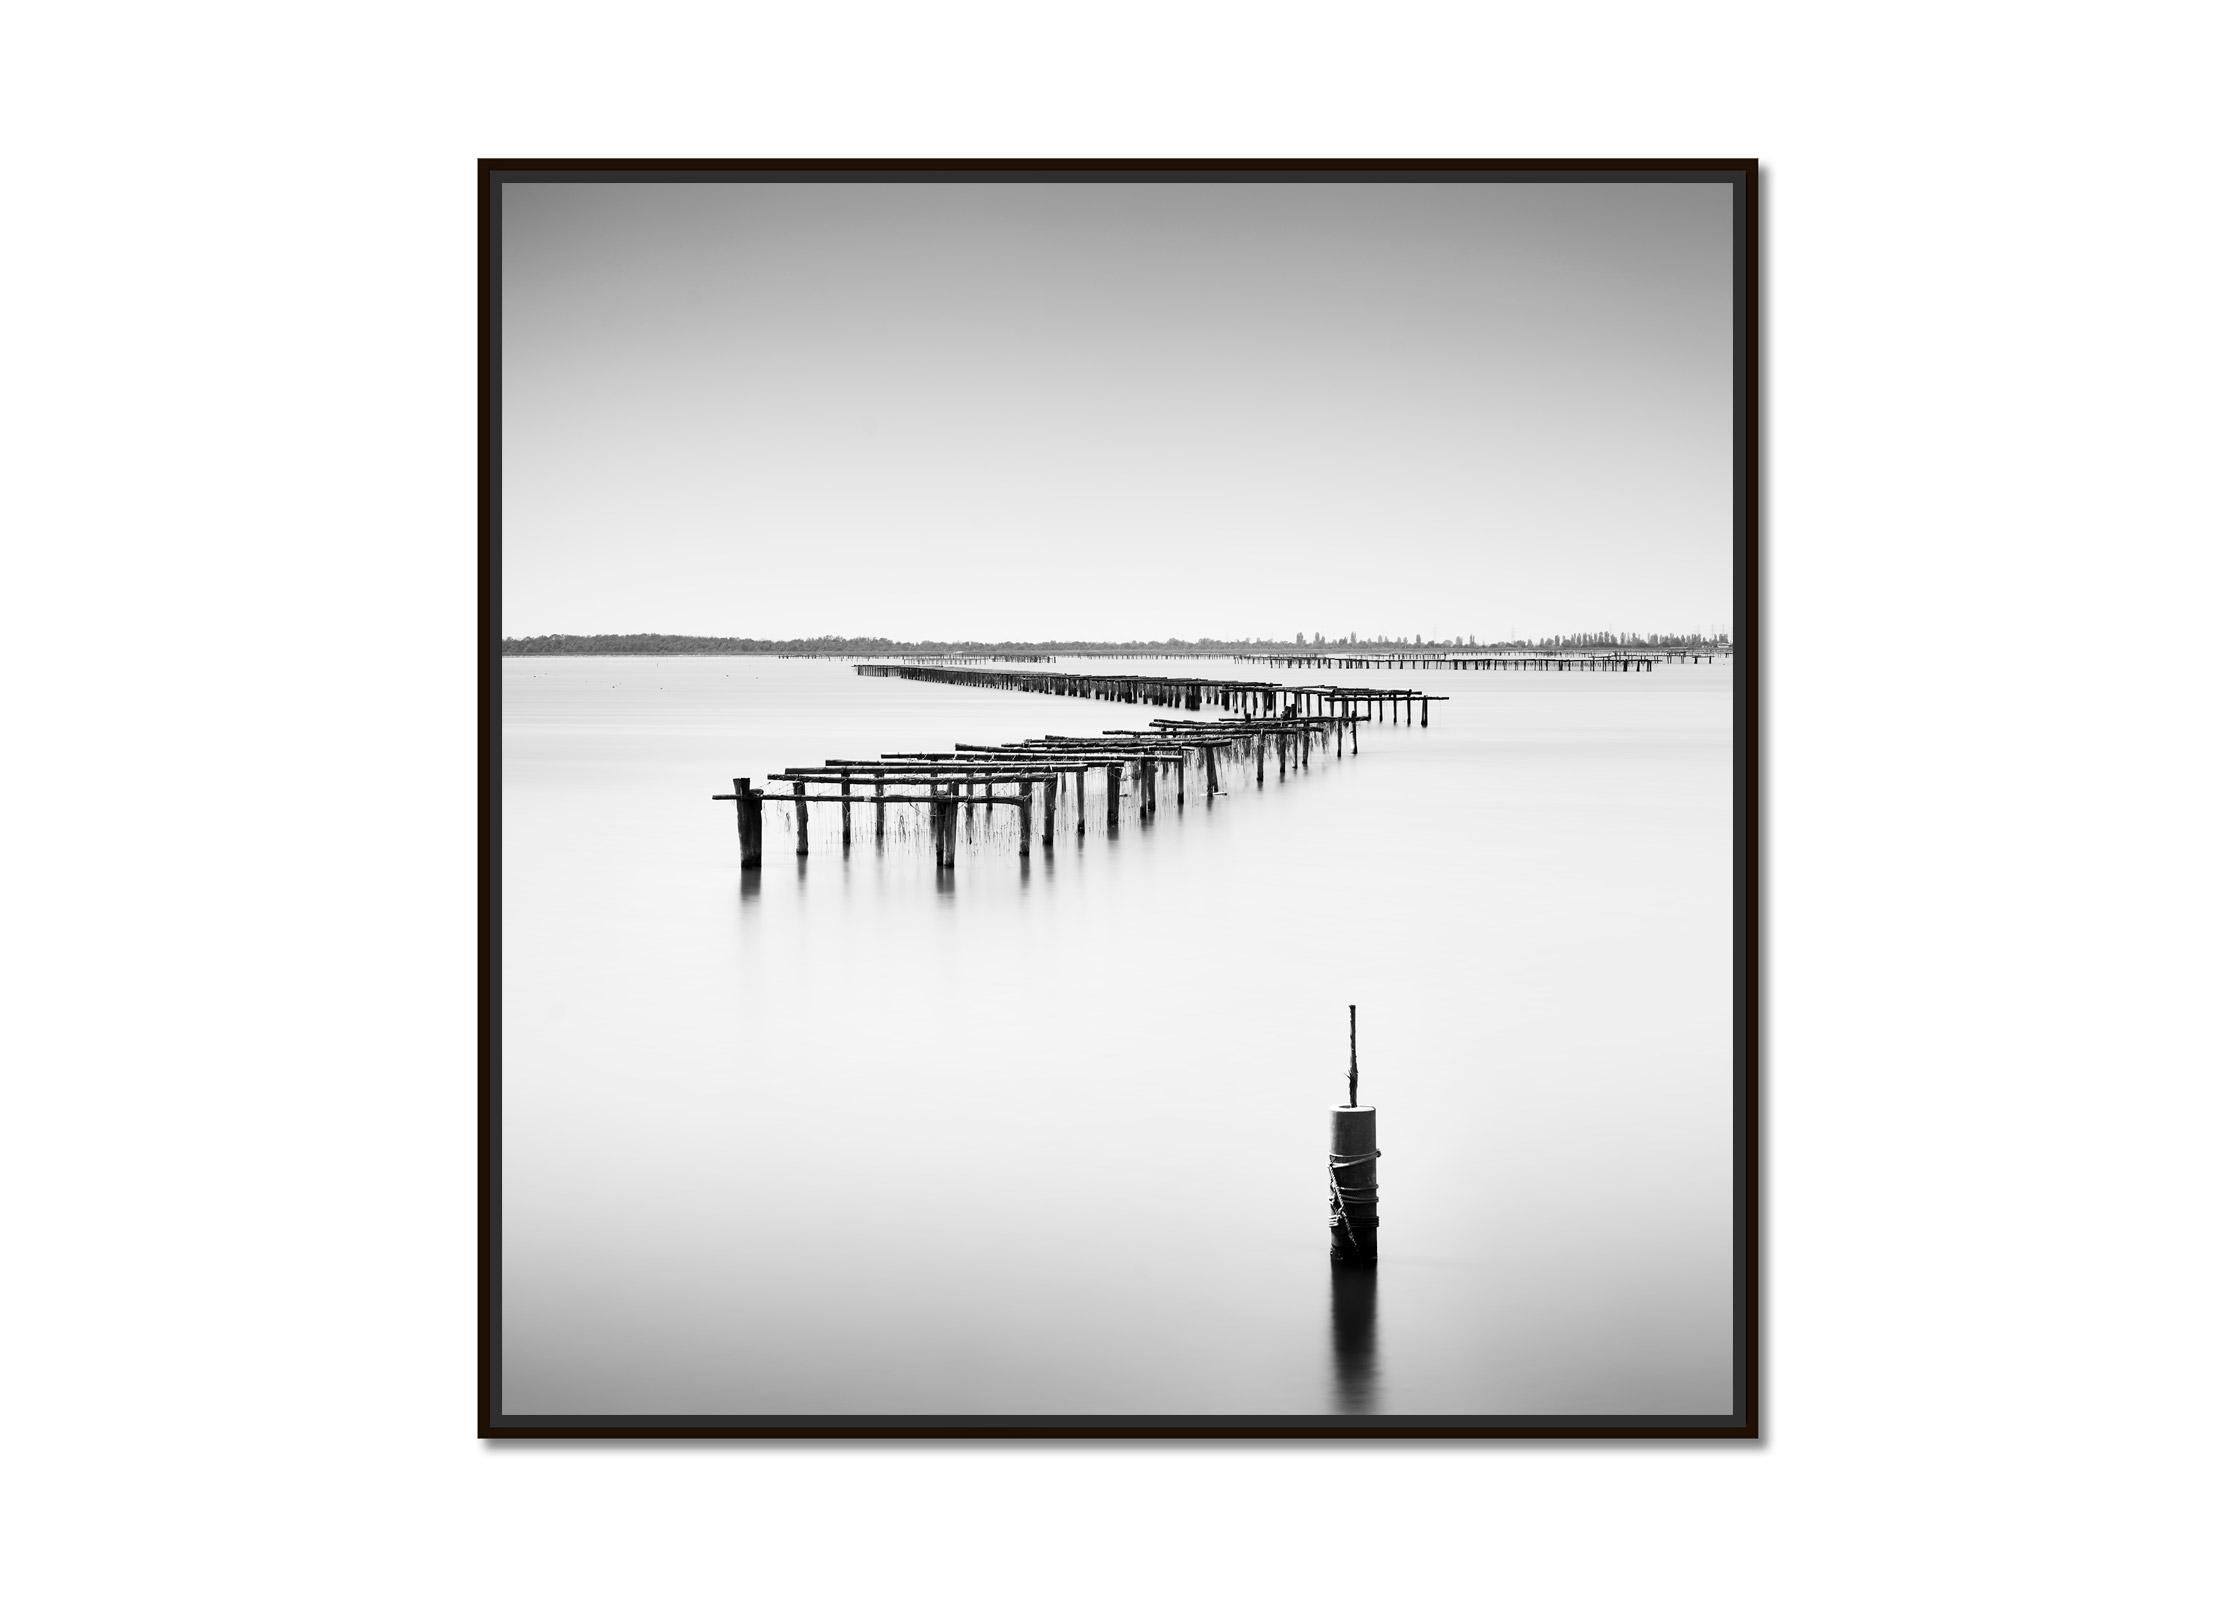 Aquaculture Structures, delta del po, black and white, landscape, photography - Photograph by Gerald Berghammer